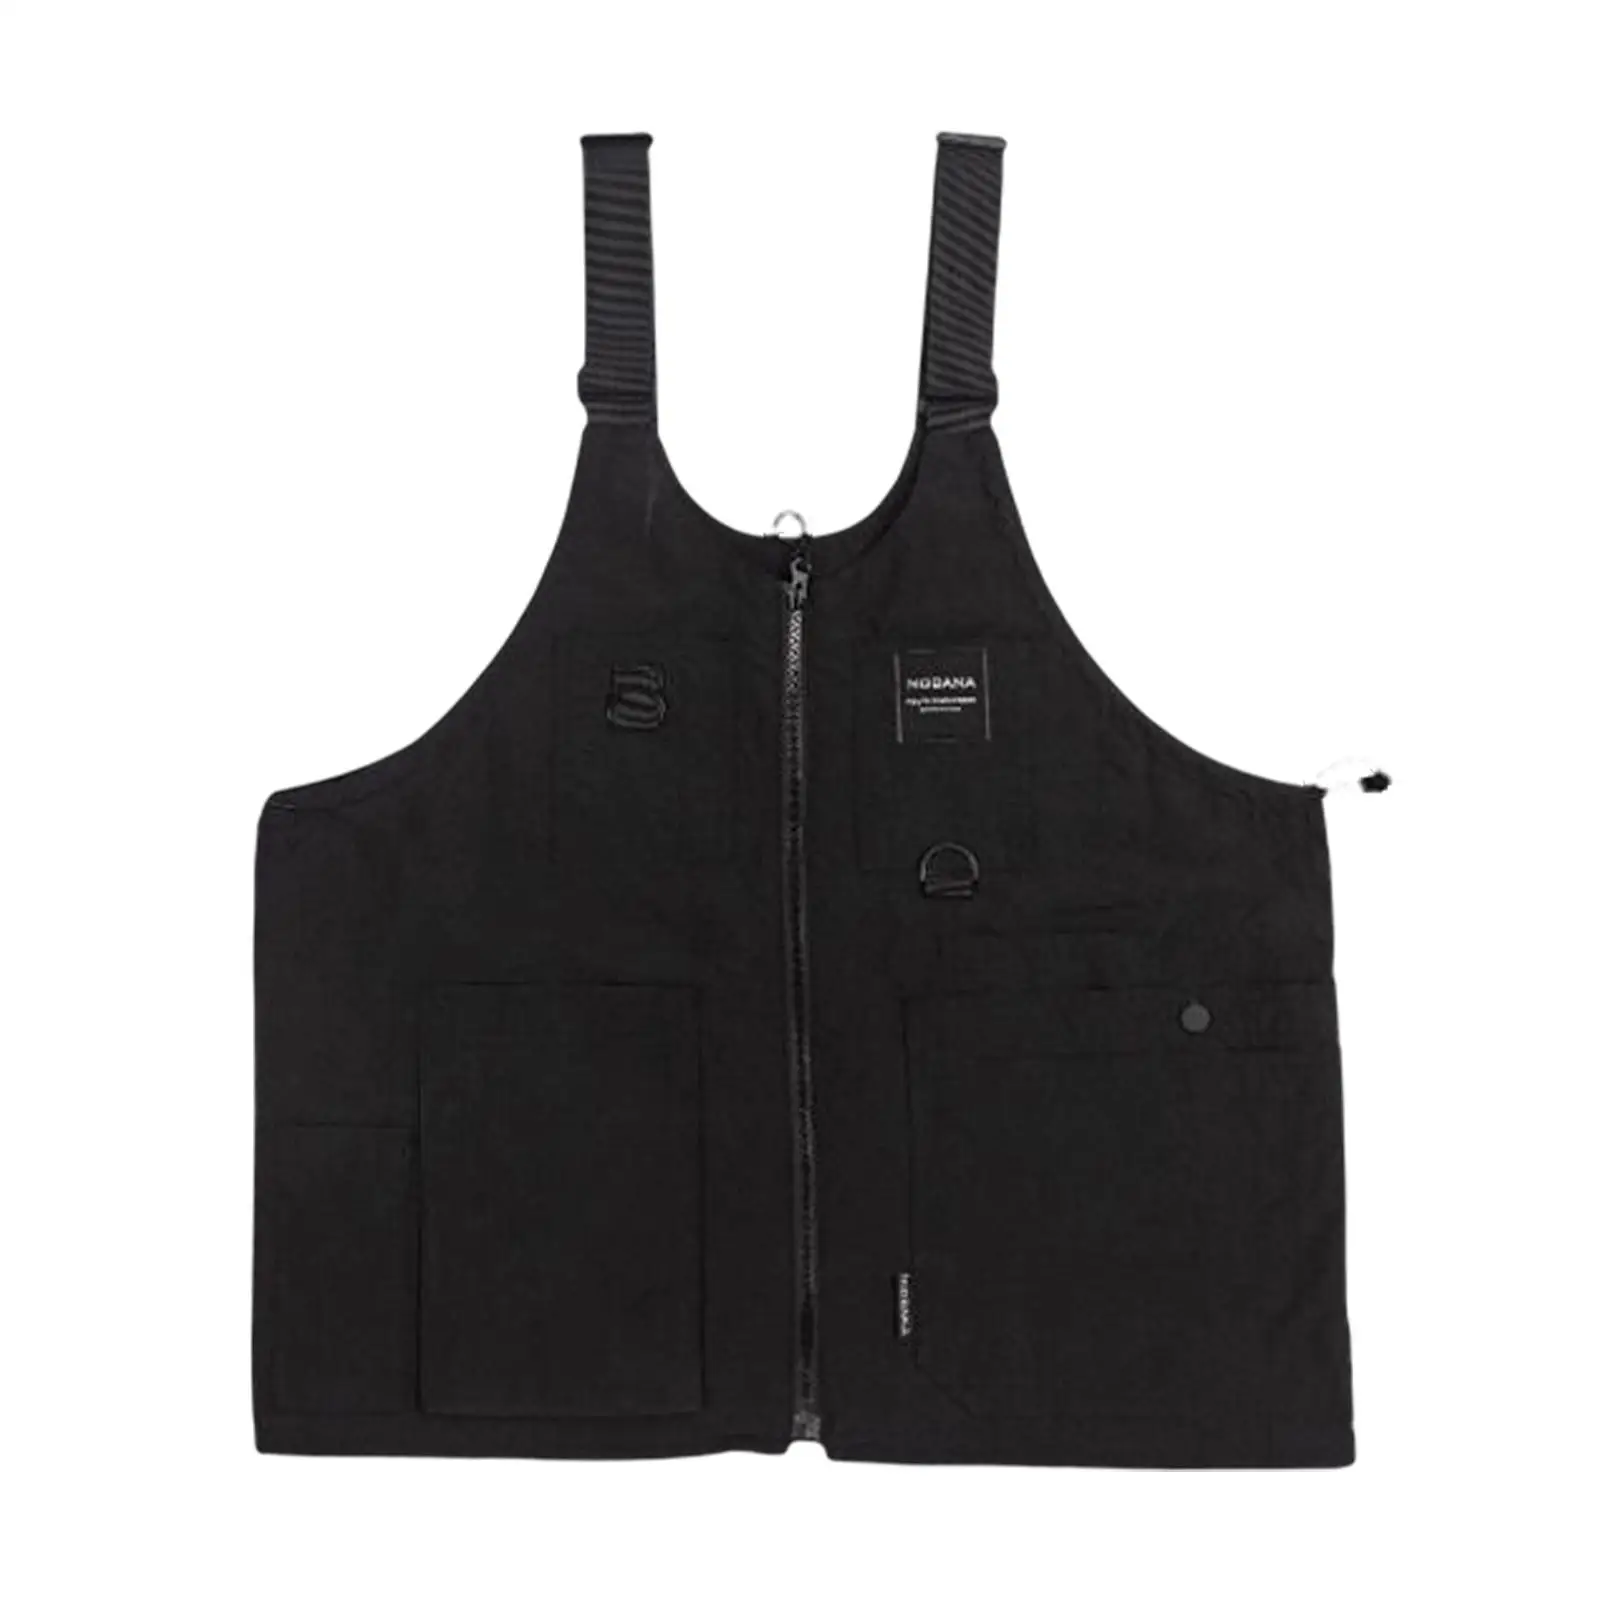 Outdoor Multi Functional Camping Vest Tote Casual Sleeveless Waistcoat Jacket Top for Photography Hiking Fishing Men Women